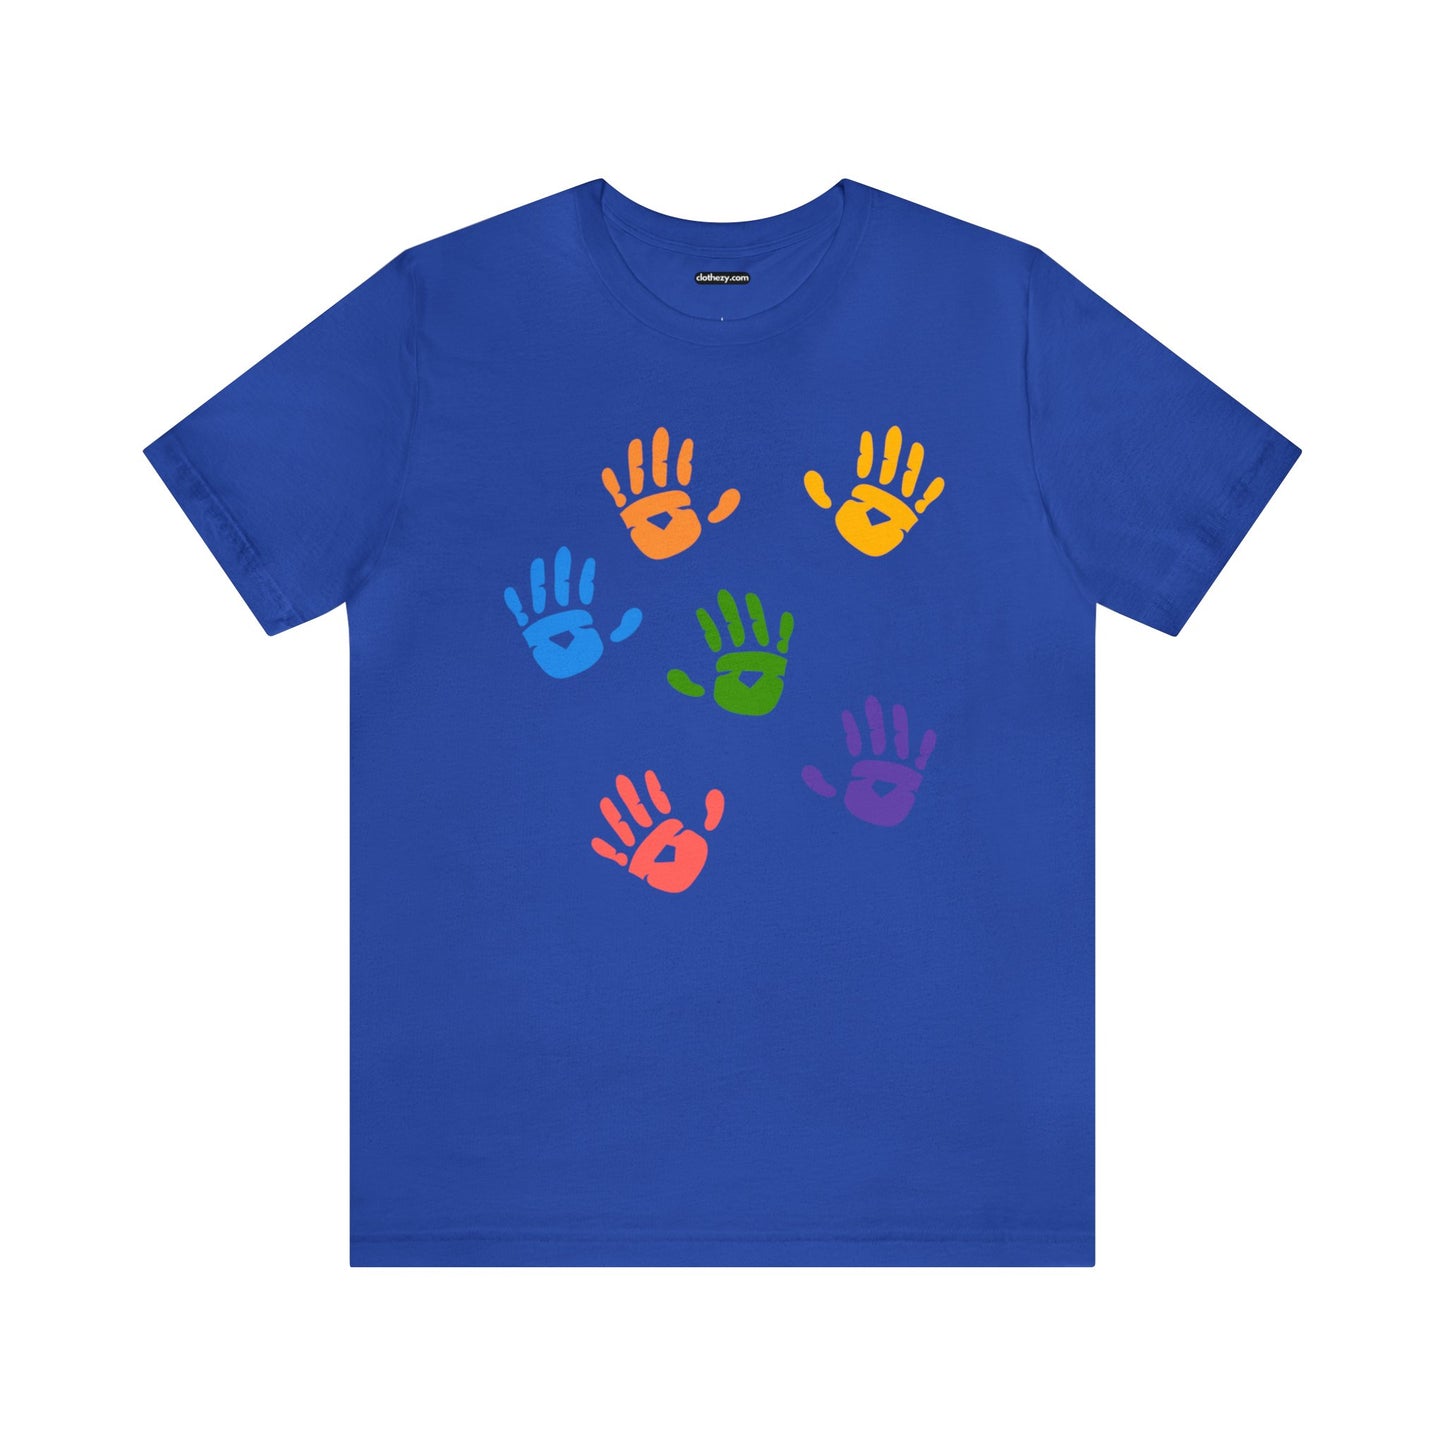 Rainbow Hand Prints T-Shirt - Unisex Adult Tee by clothezy.com in Royal Blue - Buy Now